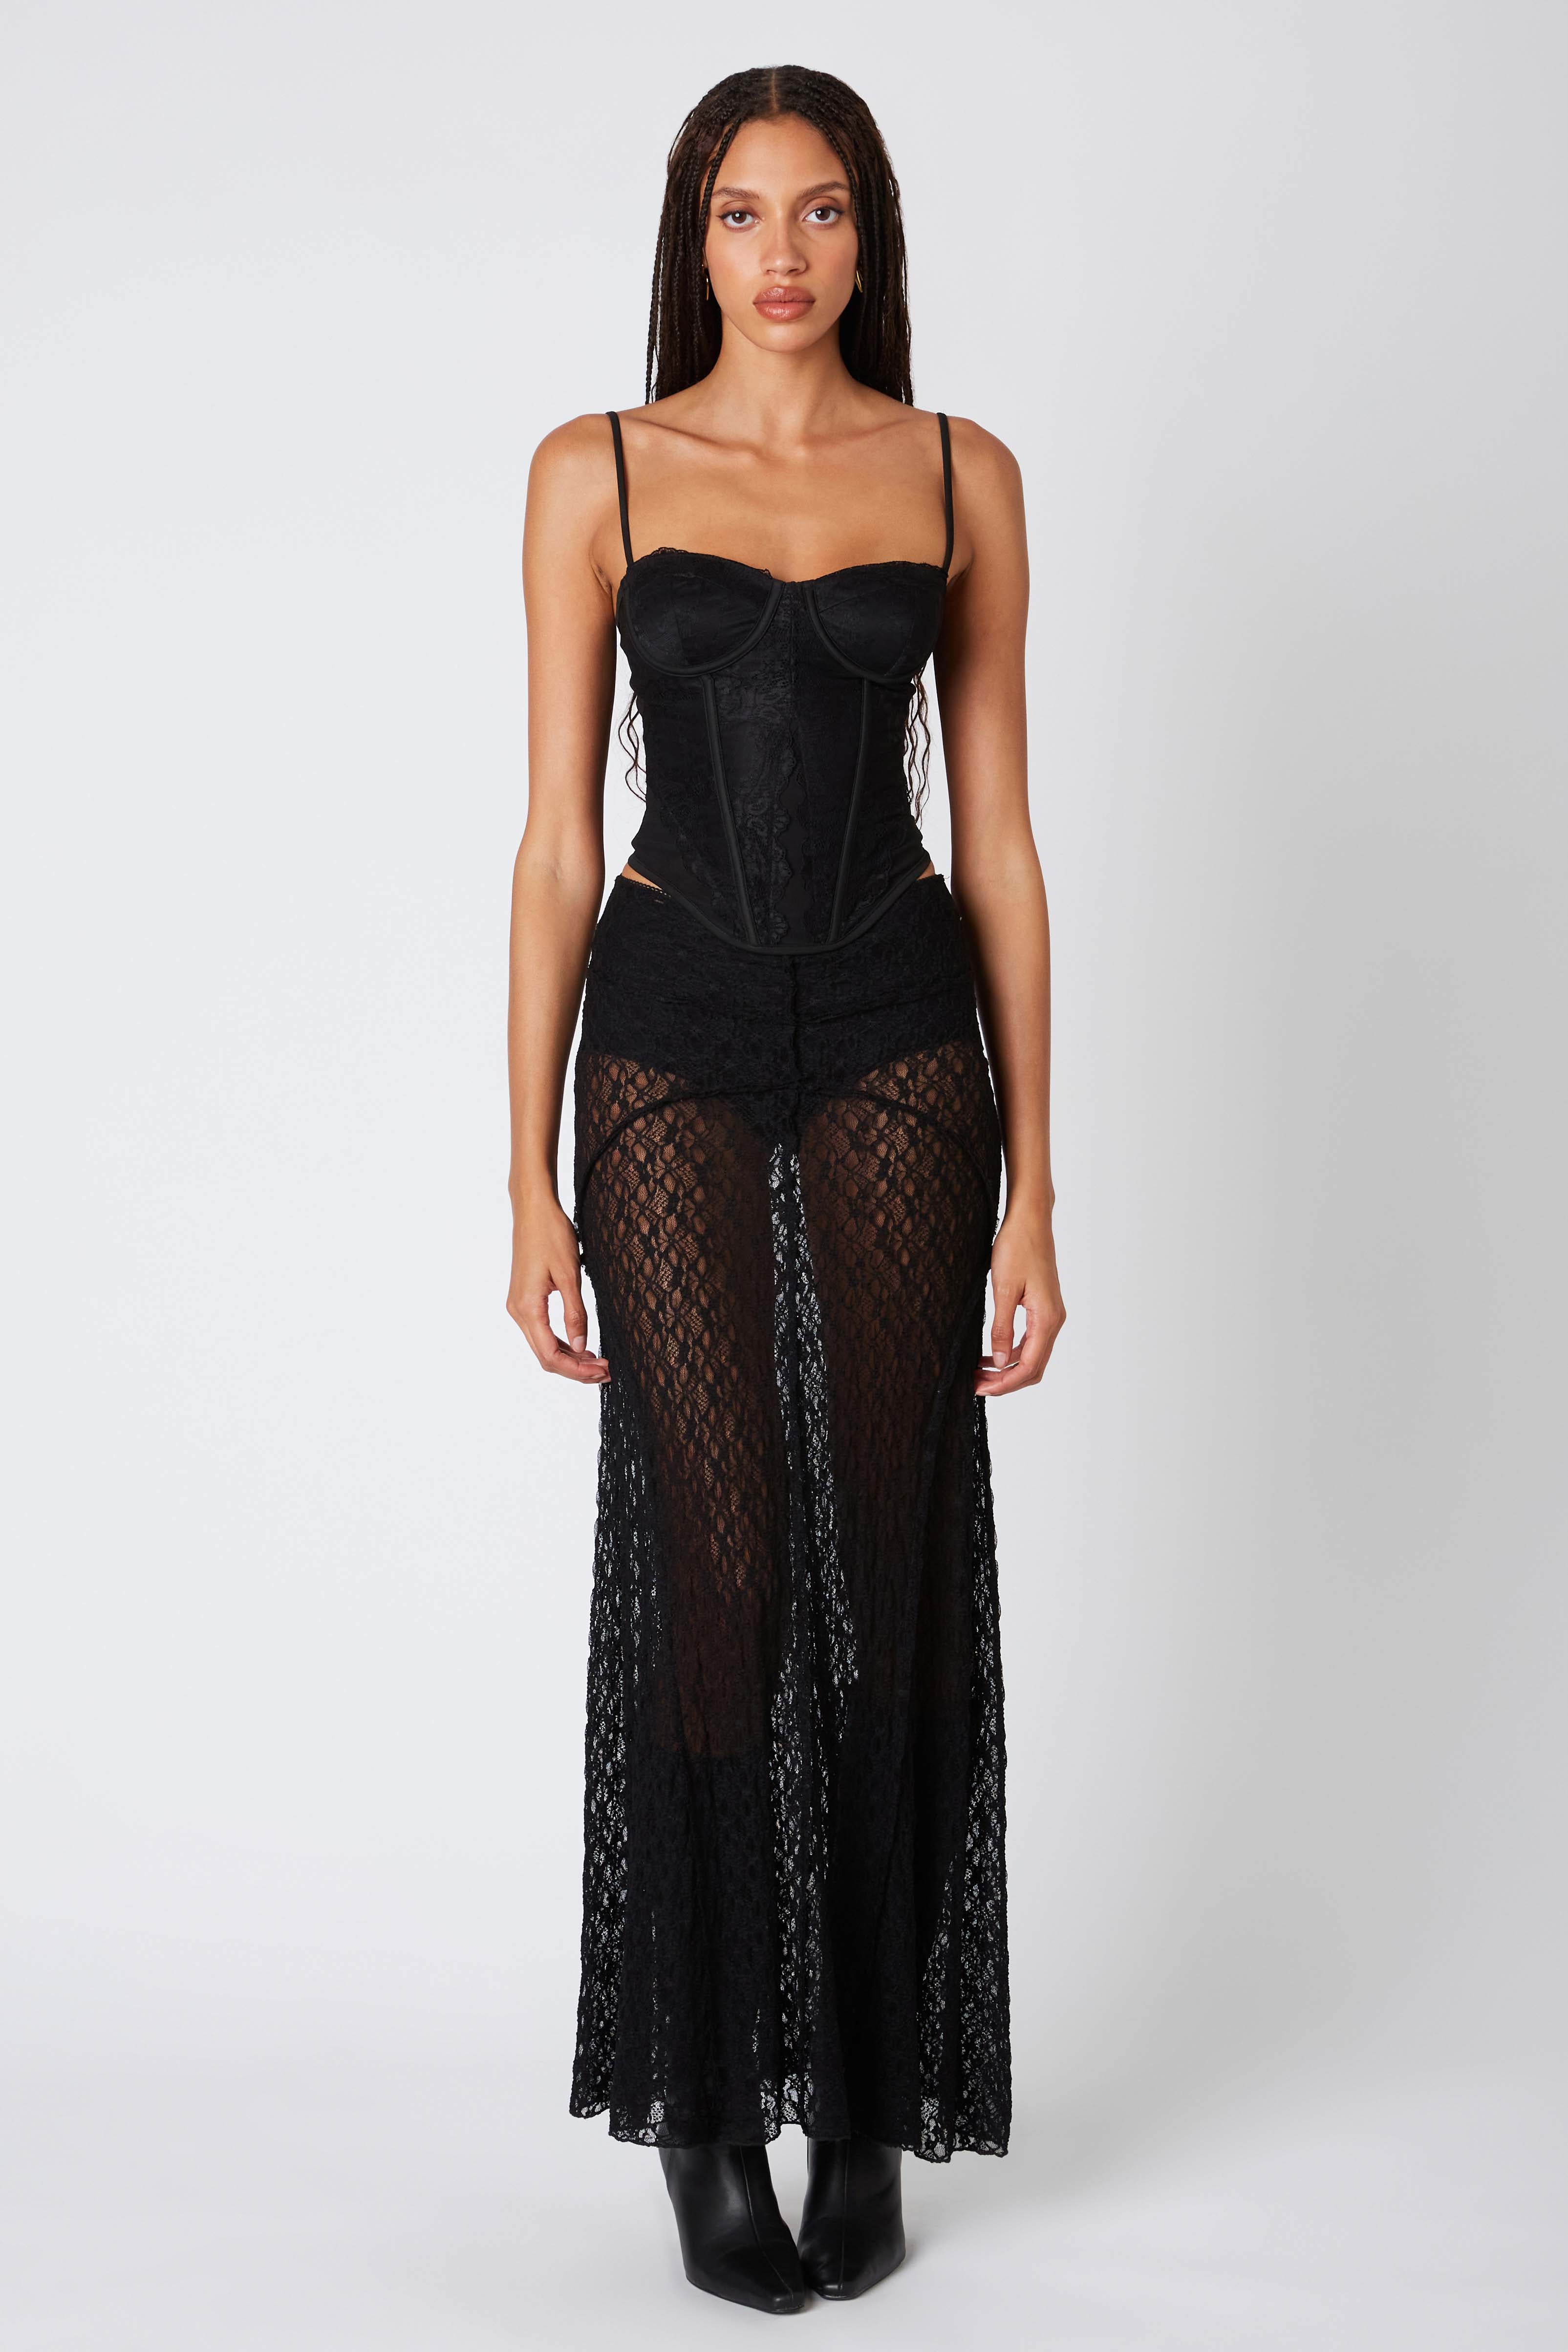 Sheer Lace Maxi Skirt in Black Front View